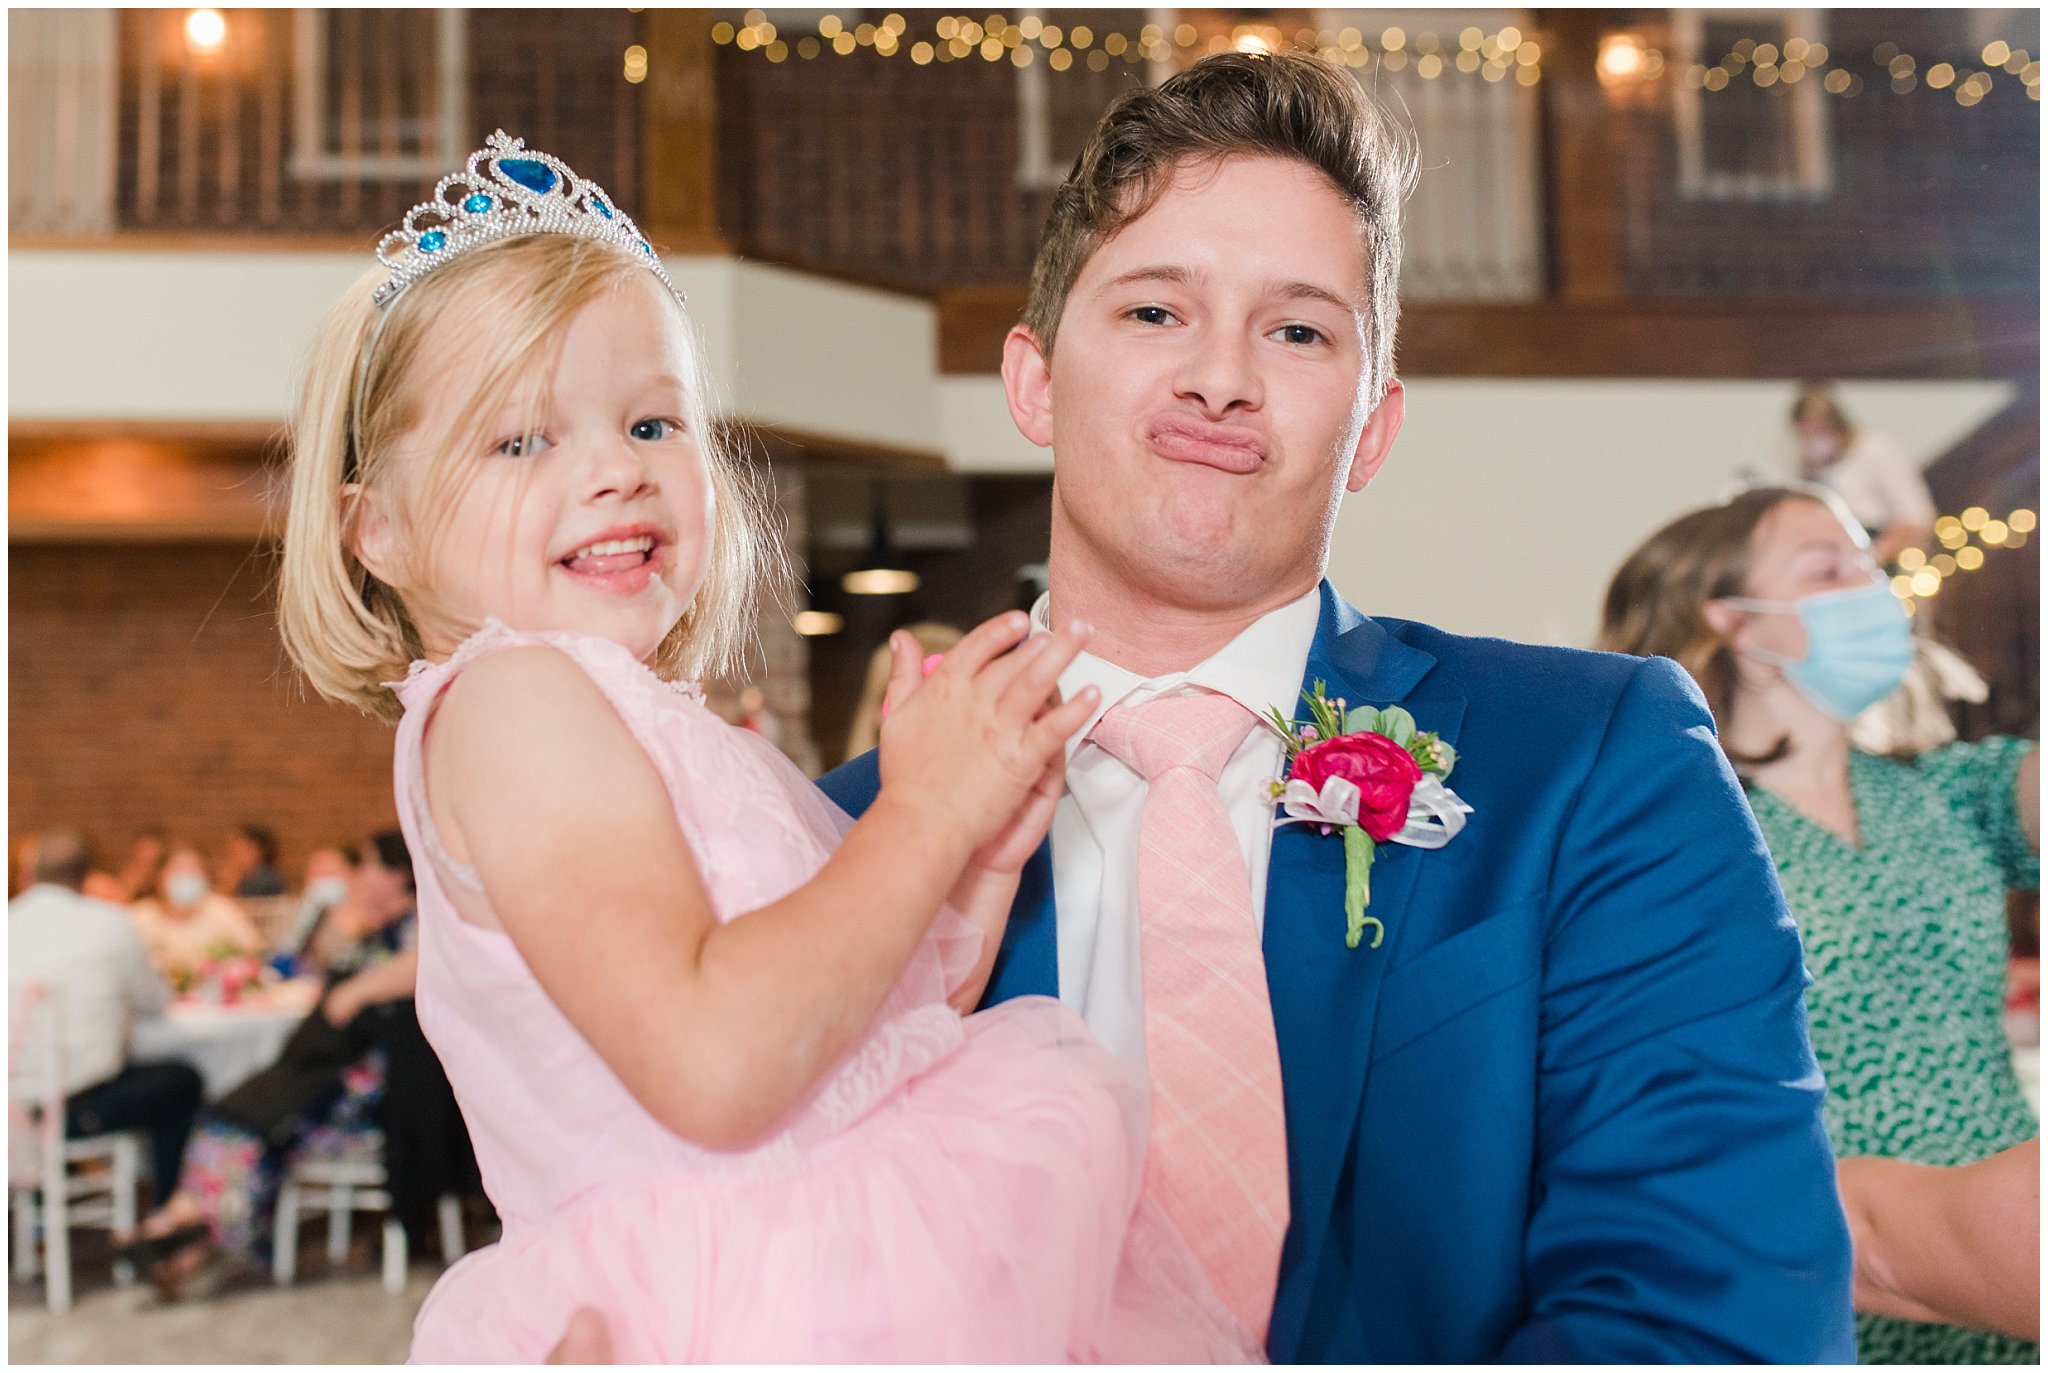 Party dancing during wedding | Talia Event Center Summer Wedding | Jessie and Dallin Photography